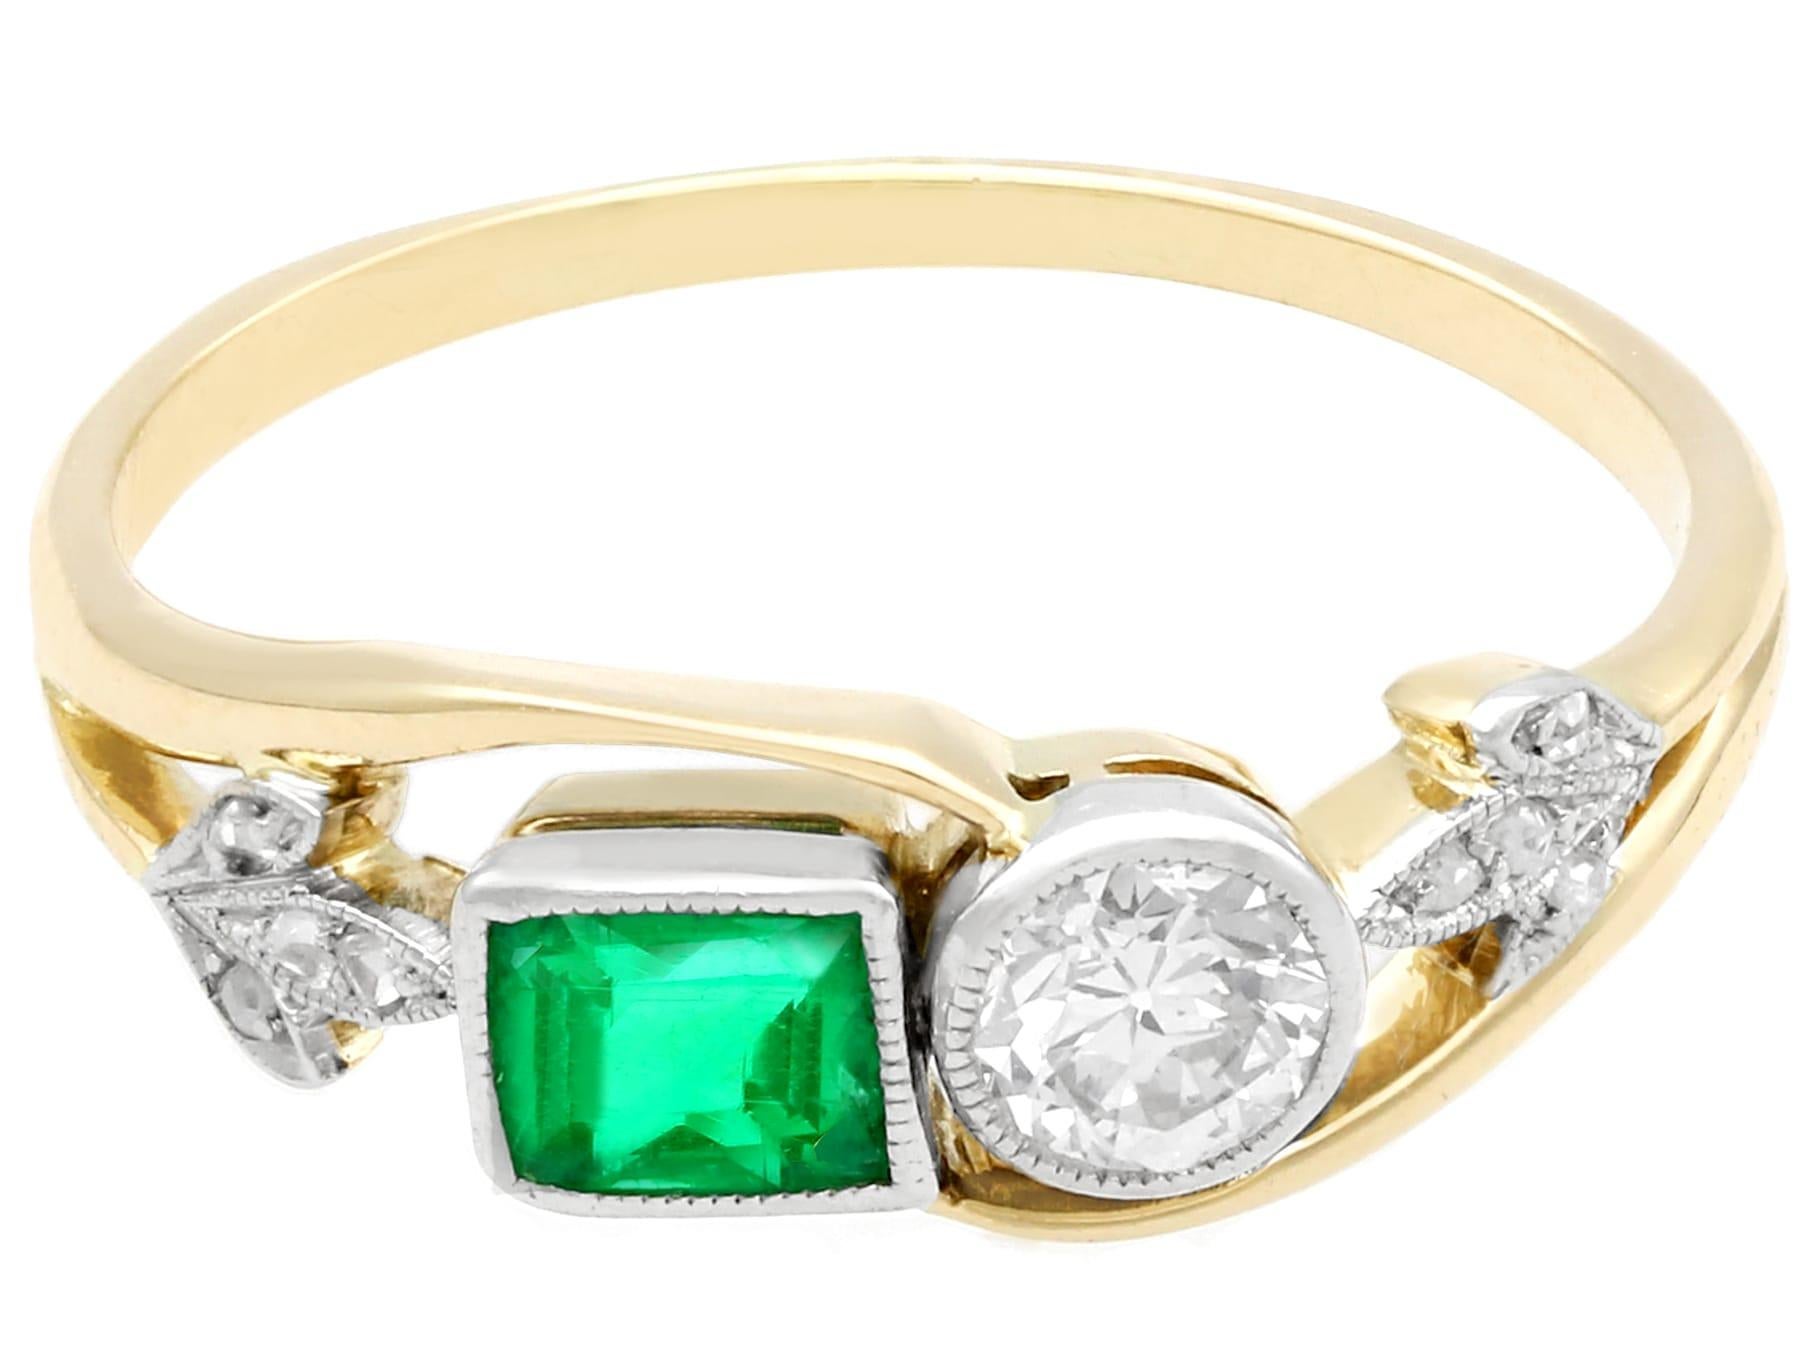 Antique Emerald and Diamond 14K Yellow Gold Twist Ring, Circa 1920 In Excellent Condition For Sale In Jesmond, Newcastle Upon Tyne